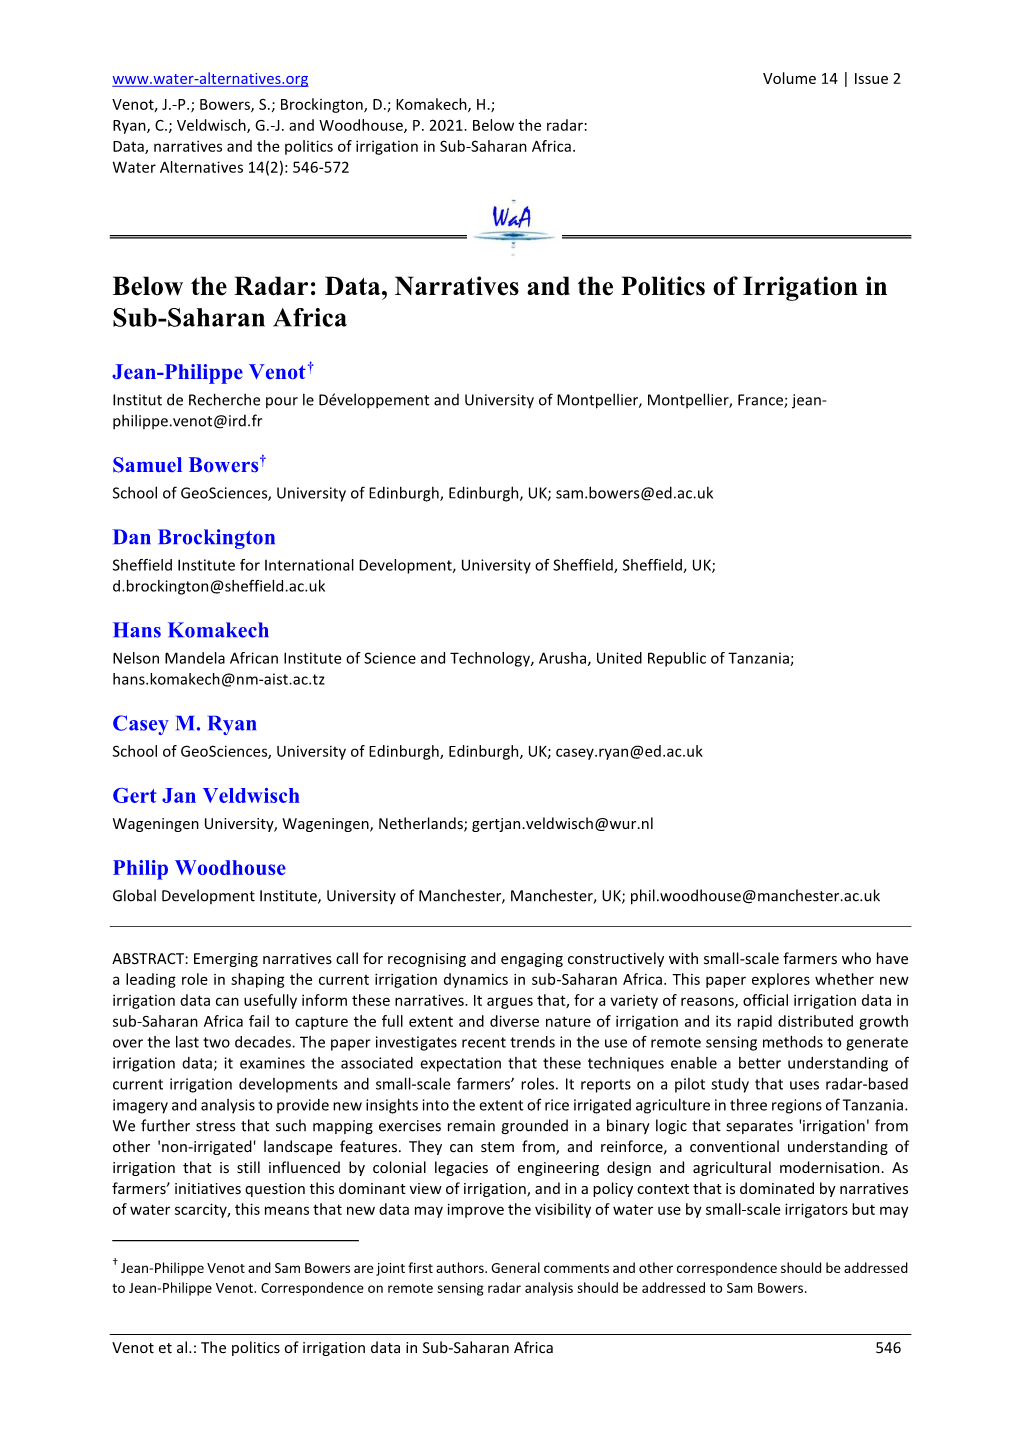 Data, Narratives and the Politics of Irrigation in Sub-Saharan Africa